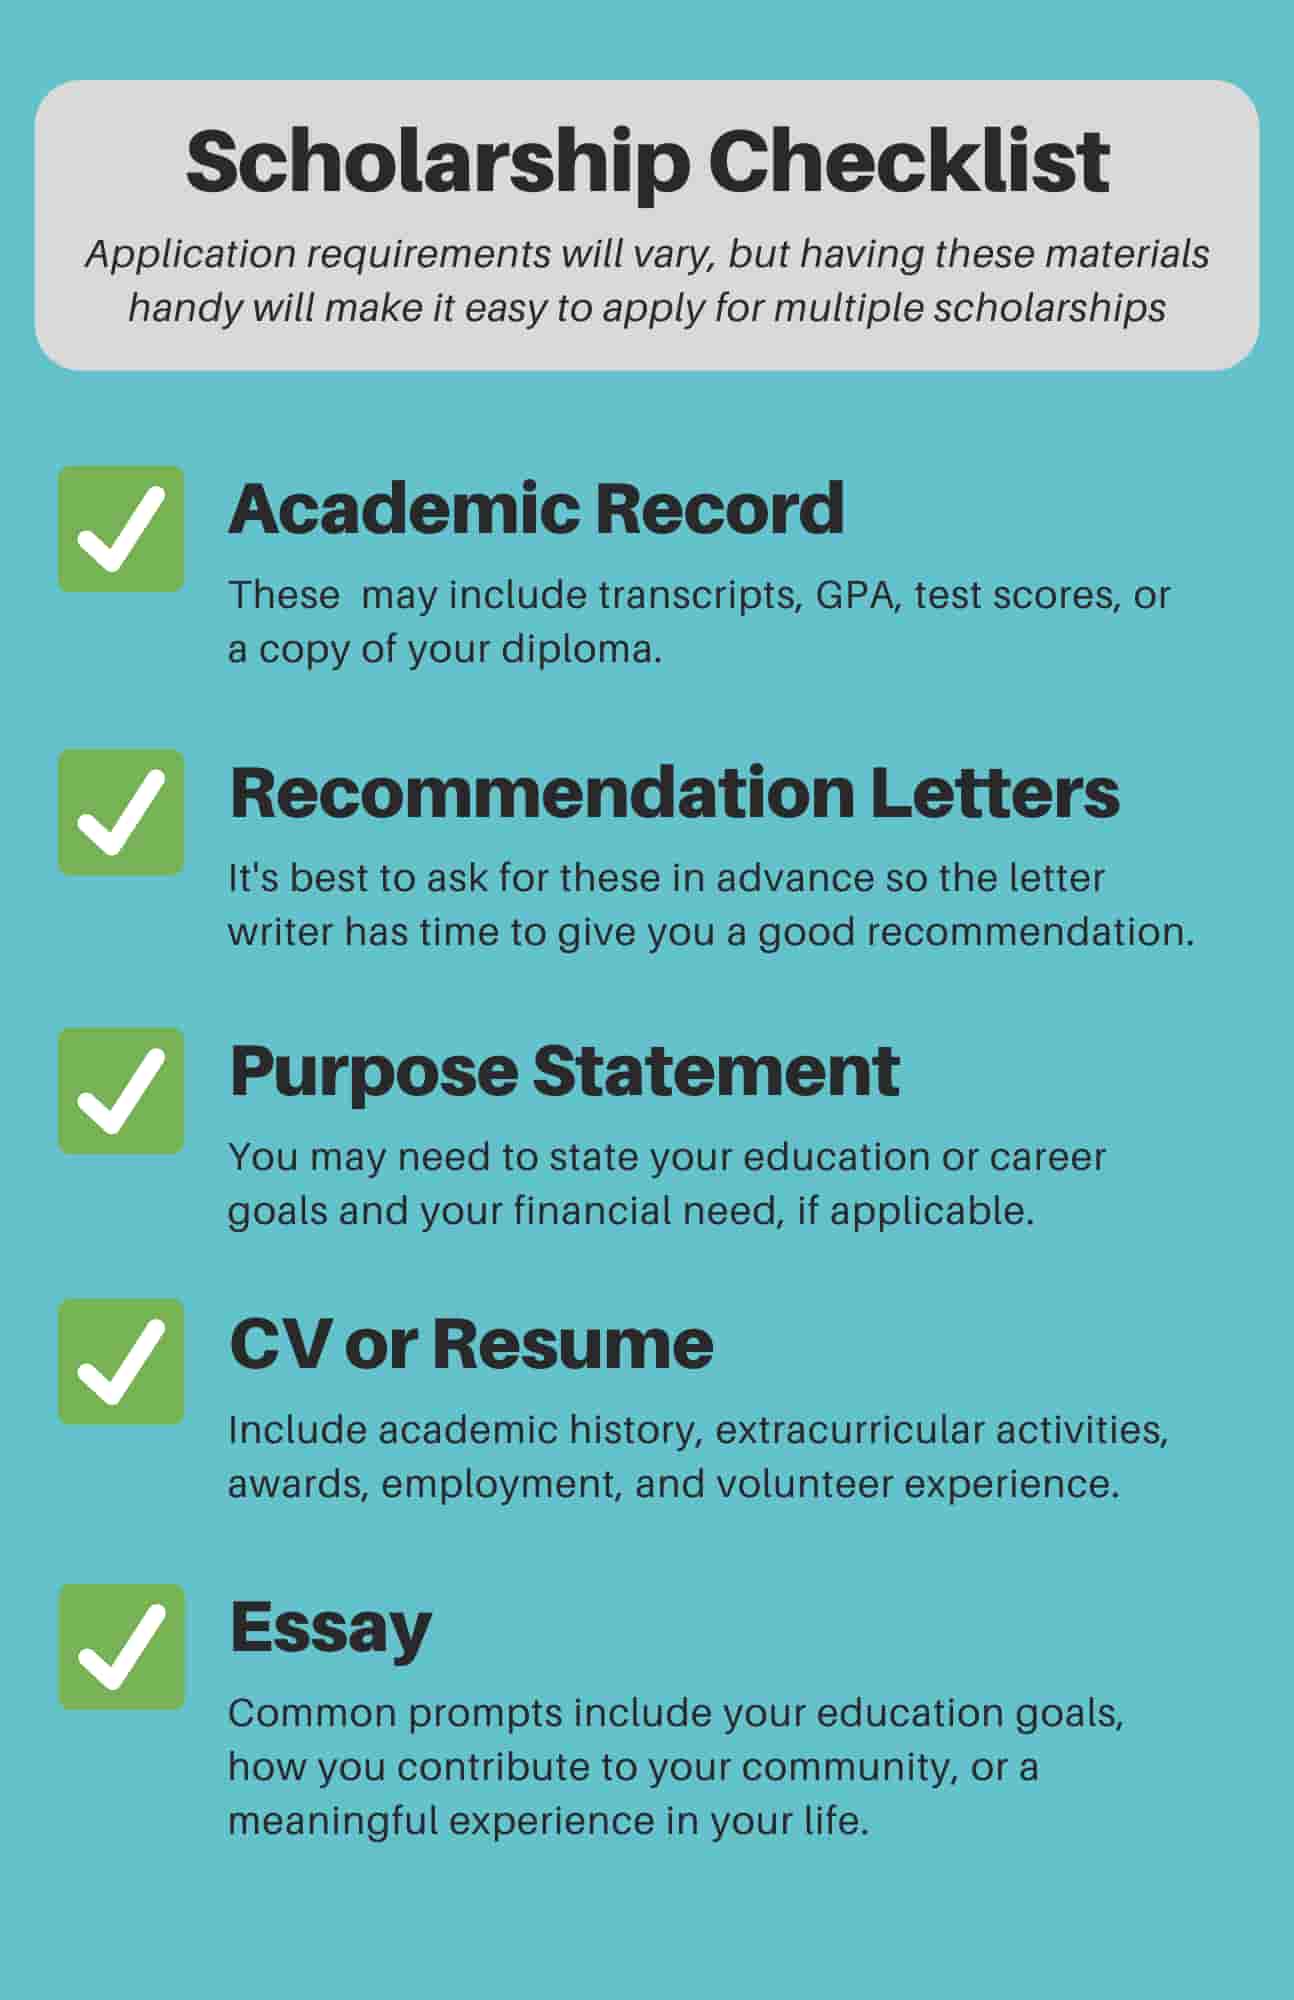 checklist for applying for a scholarship